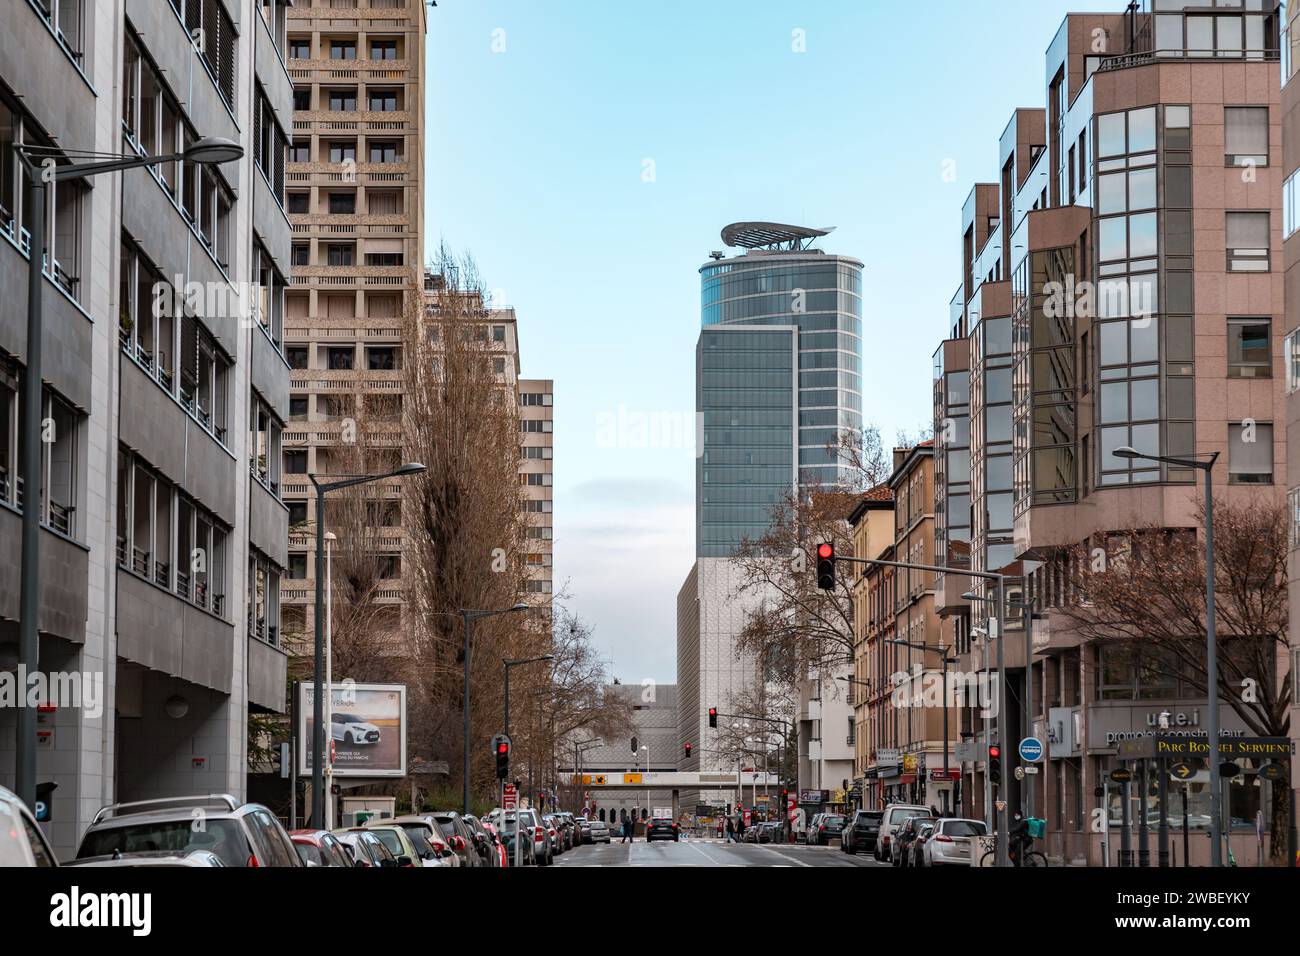 Lyon, France - January 30, 2022: Modern office buildings and residentials in the Part-Dieu district of Lyon, France. Stock Photo